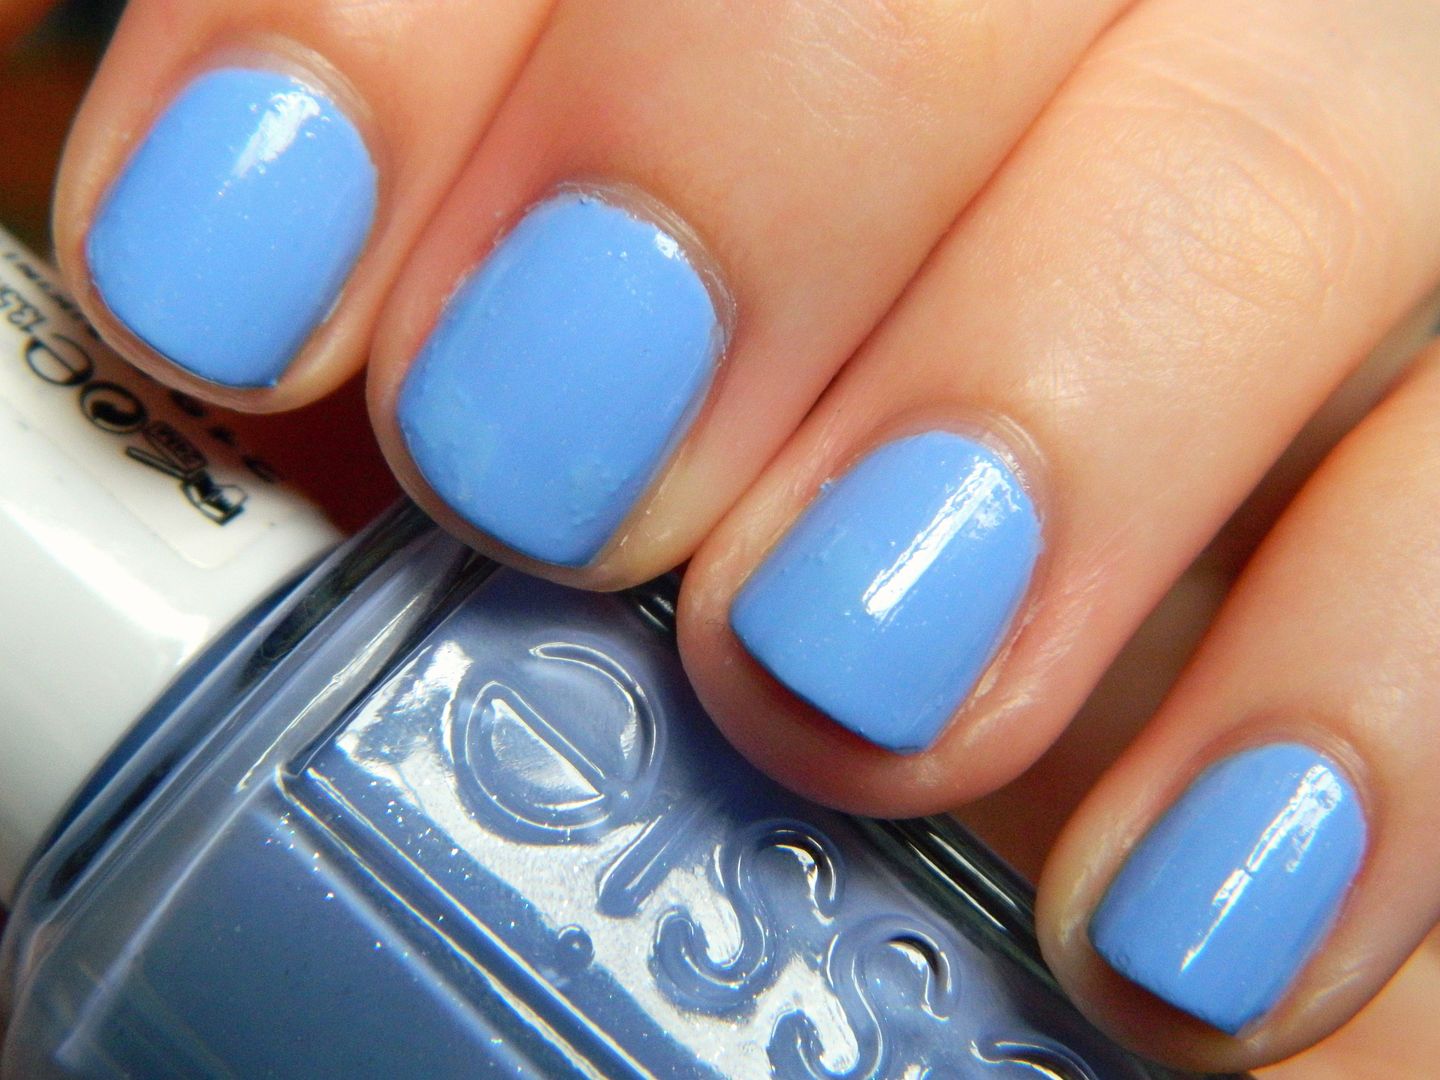 Nails Of The Day Essie Nail Polish Bikini So Teeny Swatch On The Nails Review Belle-amie